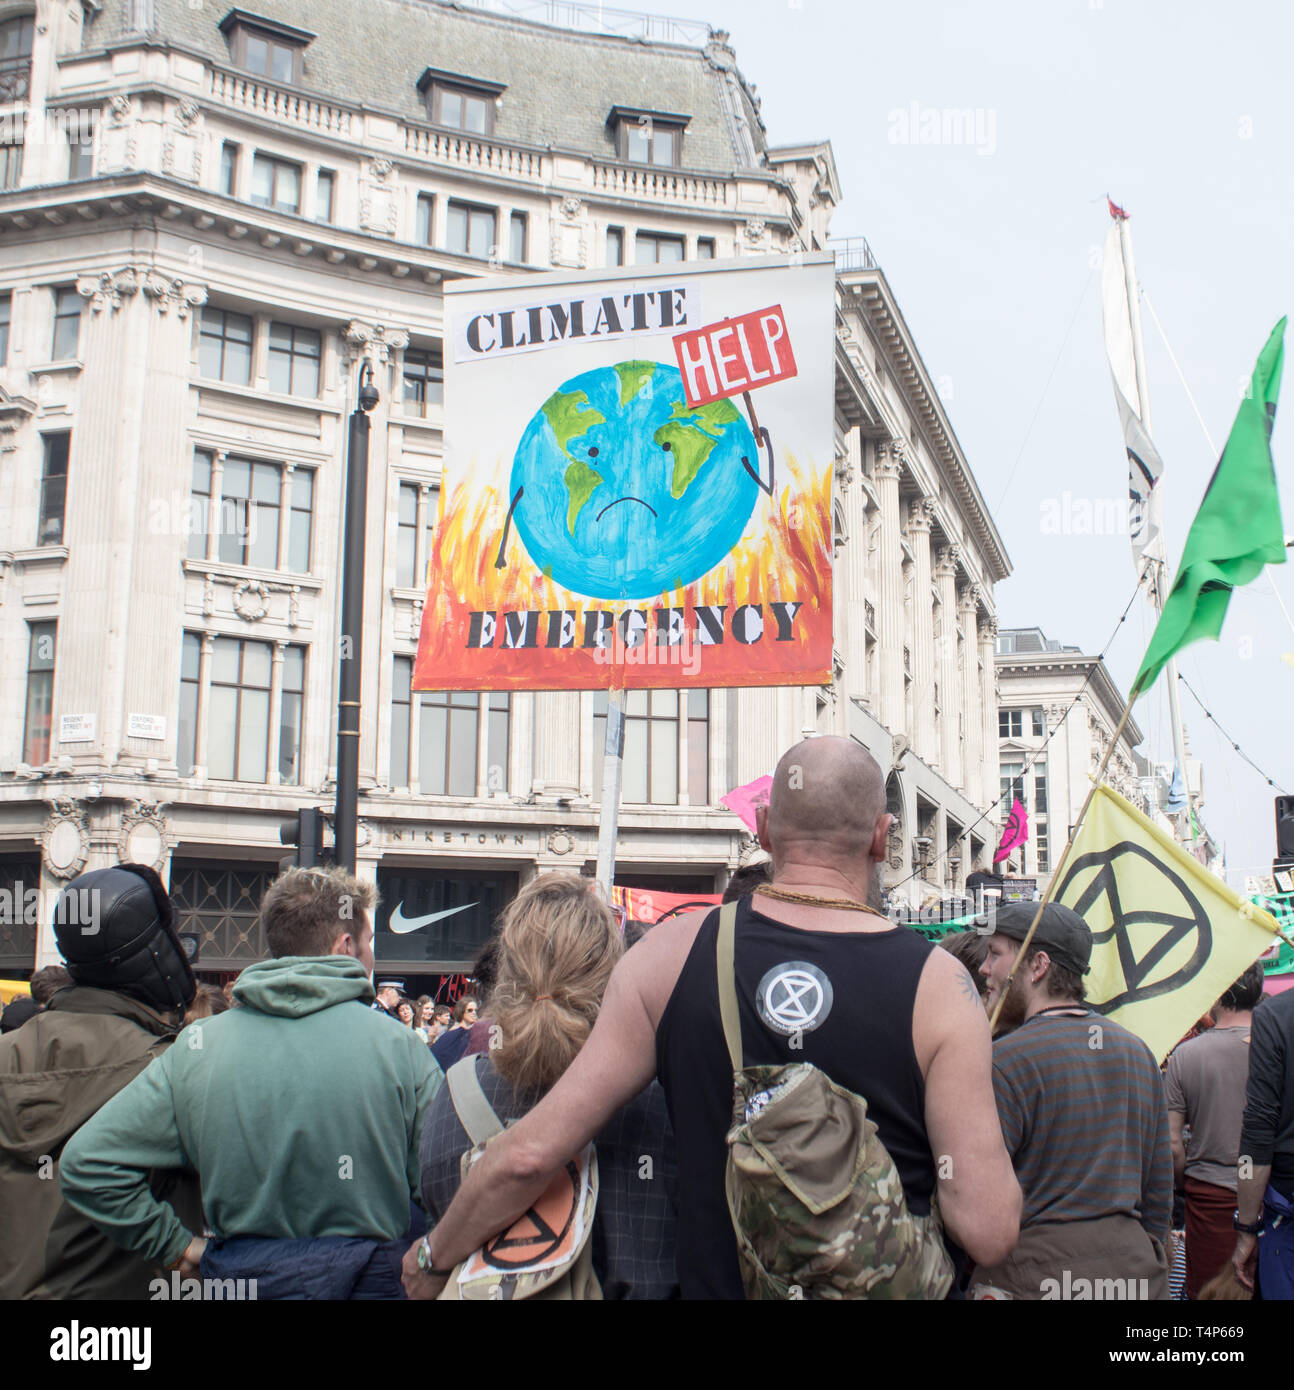 London, UK, April 17 2019 - Protesters hold a banner and an Extinction Rebellion flag at a climate change protest outside Oxford Circus underground st Stock Photo